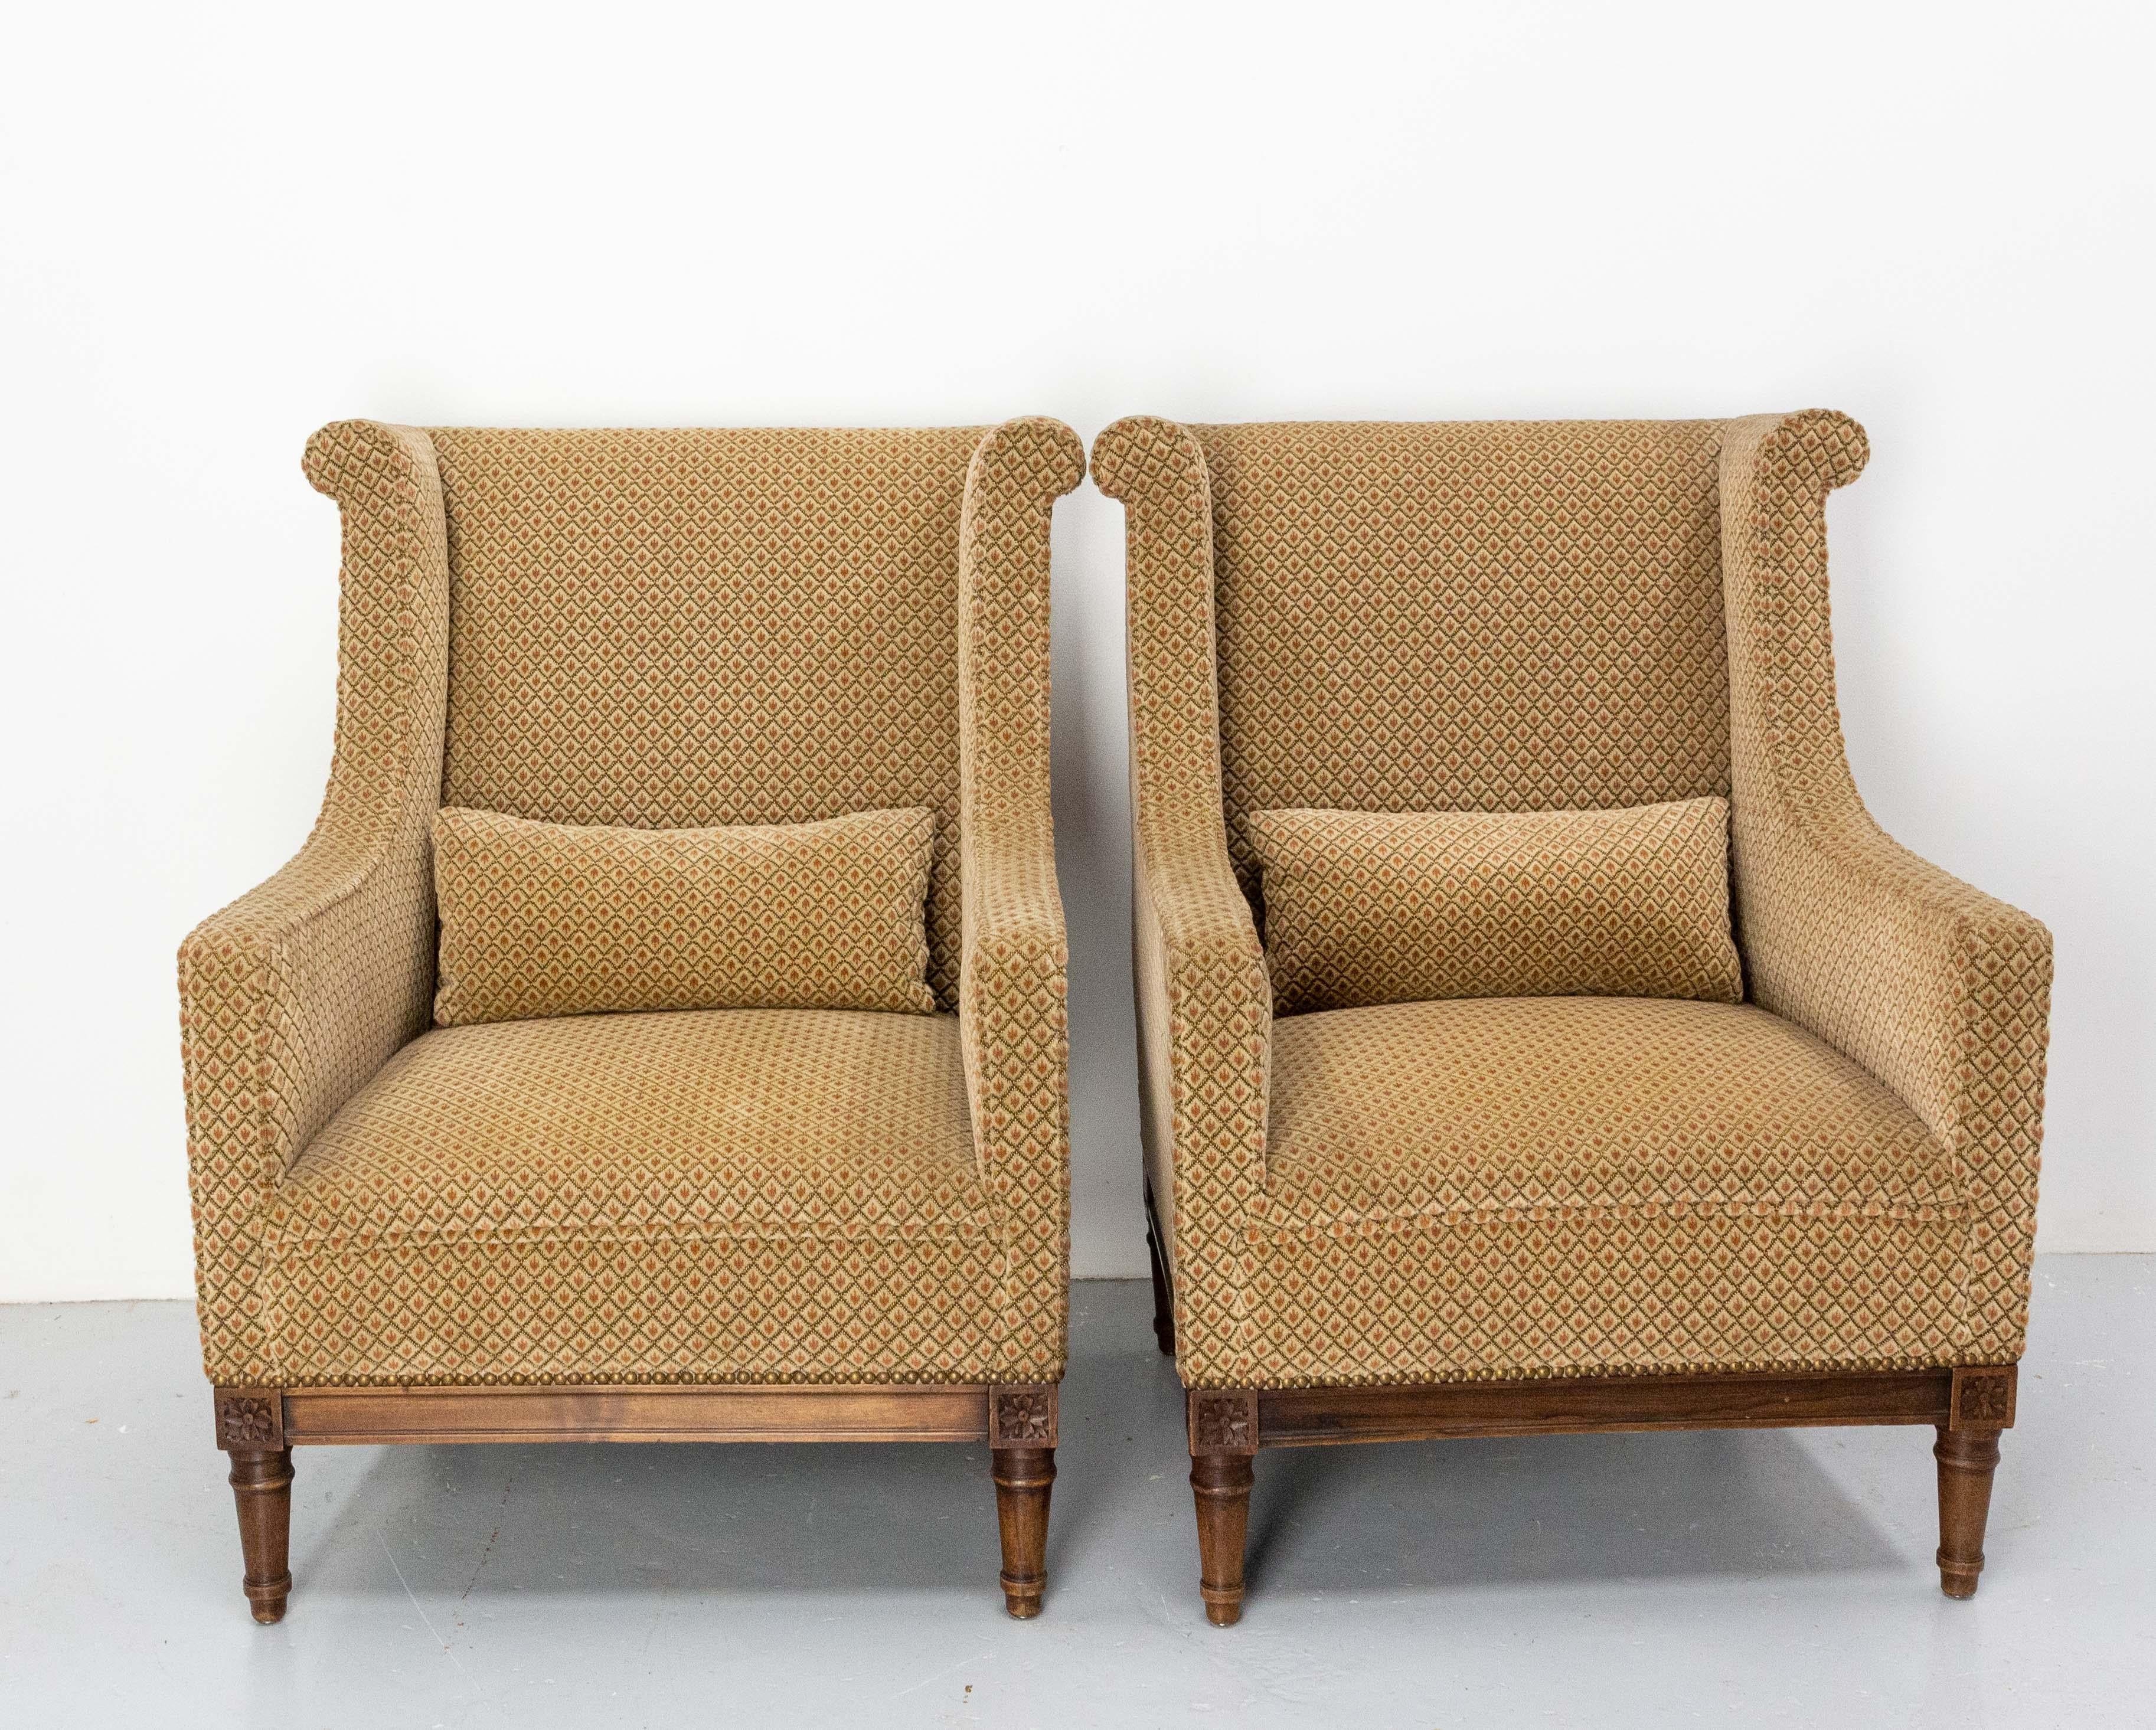 Pair of fauteuil armchair French Napoleon III, circa 1880
Antique, late 19th century,
Sound and solid 
It can be recovered if you wish but the velvet is clean and in good condition
Very comfortable.

Shipping:
L149 P72 H72 47Kg.